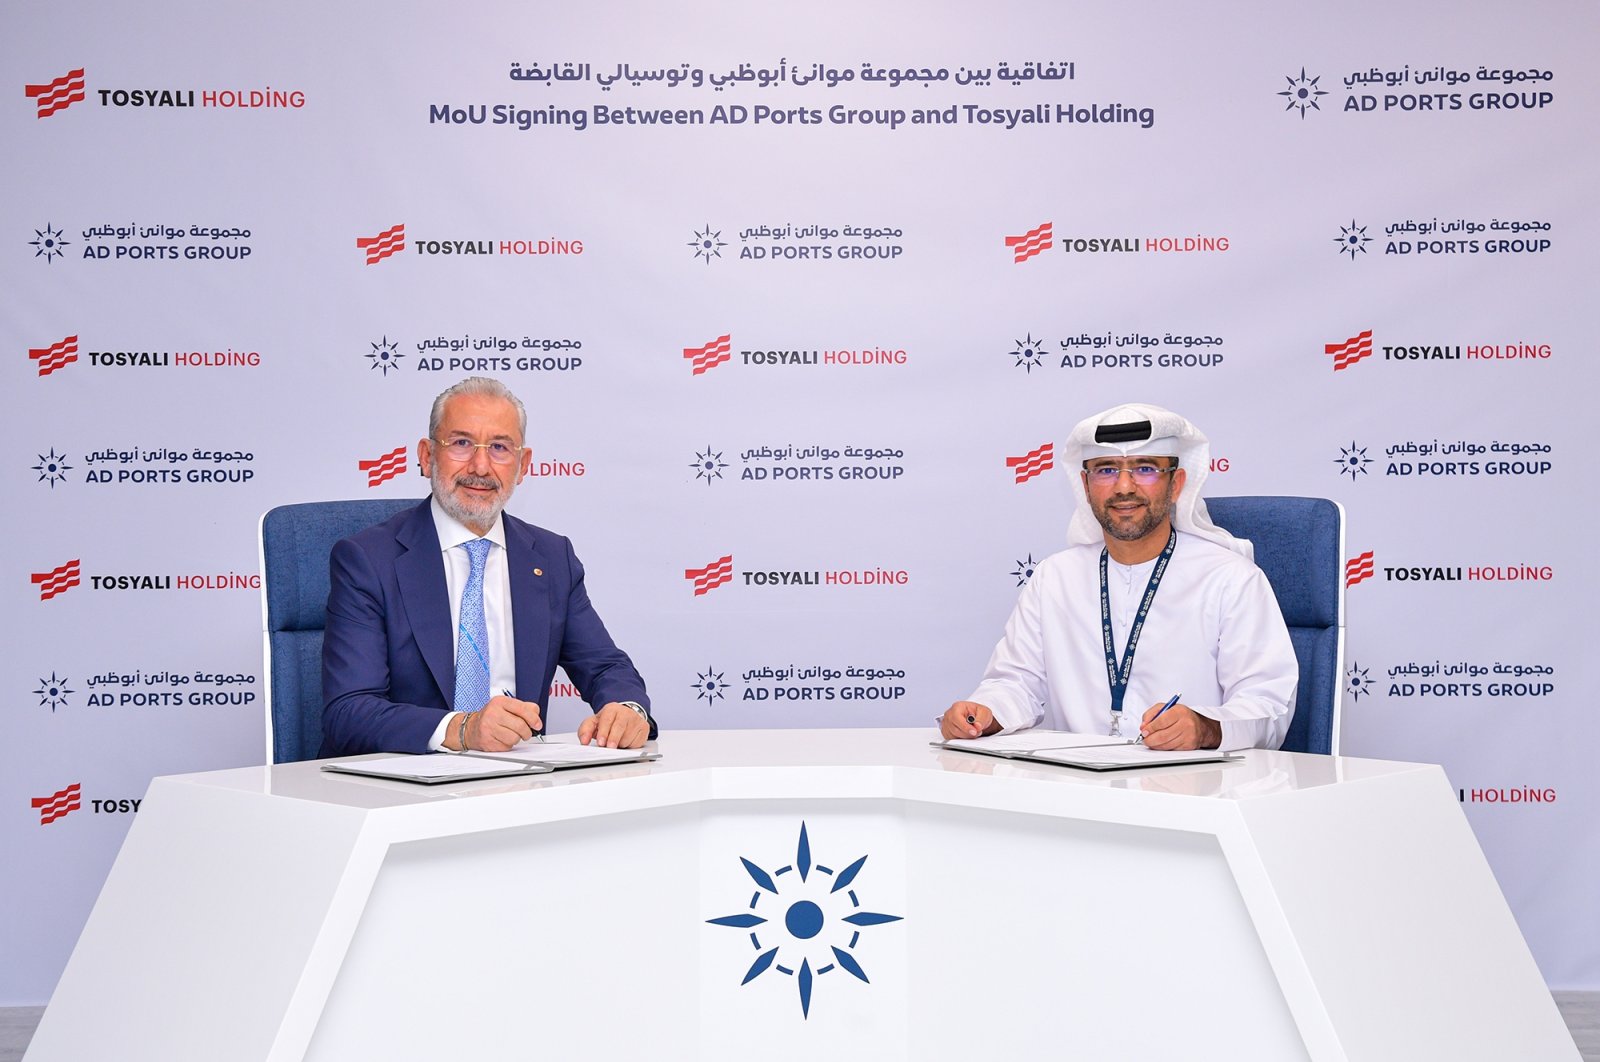 Fuat Tosyalı (L), chairperson of the Board of Directors of Tosyalı Holding, and Mohamed Juma Al Shamisi (R), managing director and CEO of AD Ports Group, pose for a photo during a signing ceremony of a Memorandum of Understanding, in Abu Dhabi, United Arab Emirates (UAE), Jan. 25, 2023. (Courtesy of Tosyalı Holding)